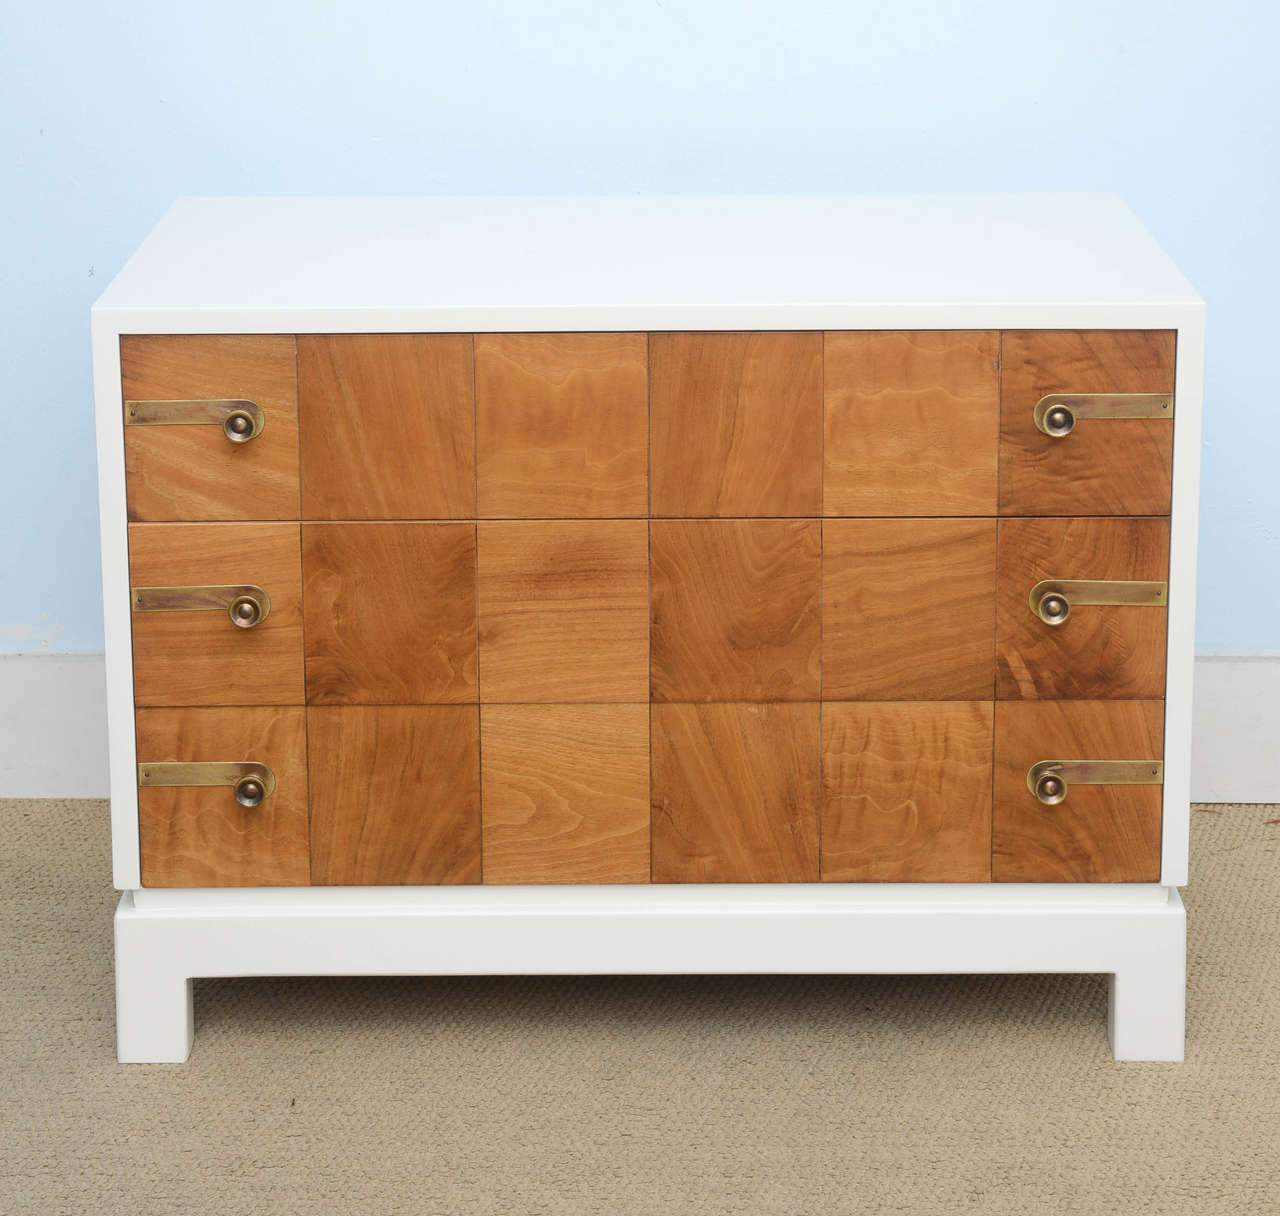 Beautiful two-toned dresser designed by Renzo Ruttili for Johnson Furniture Co. This piece is signed and it still retains its original John Stuart showroom label. The piece has been totally refurbished and it is in excellent condition. The frame has